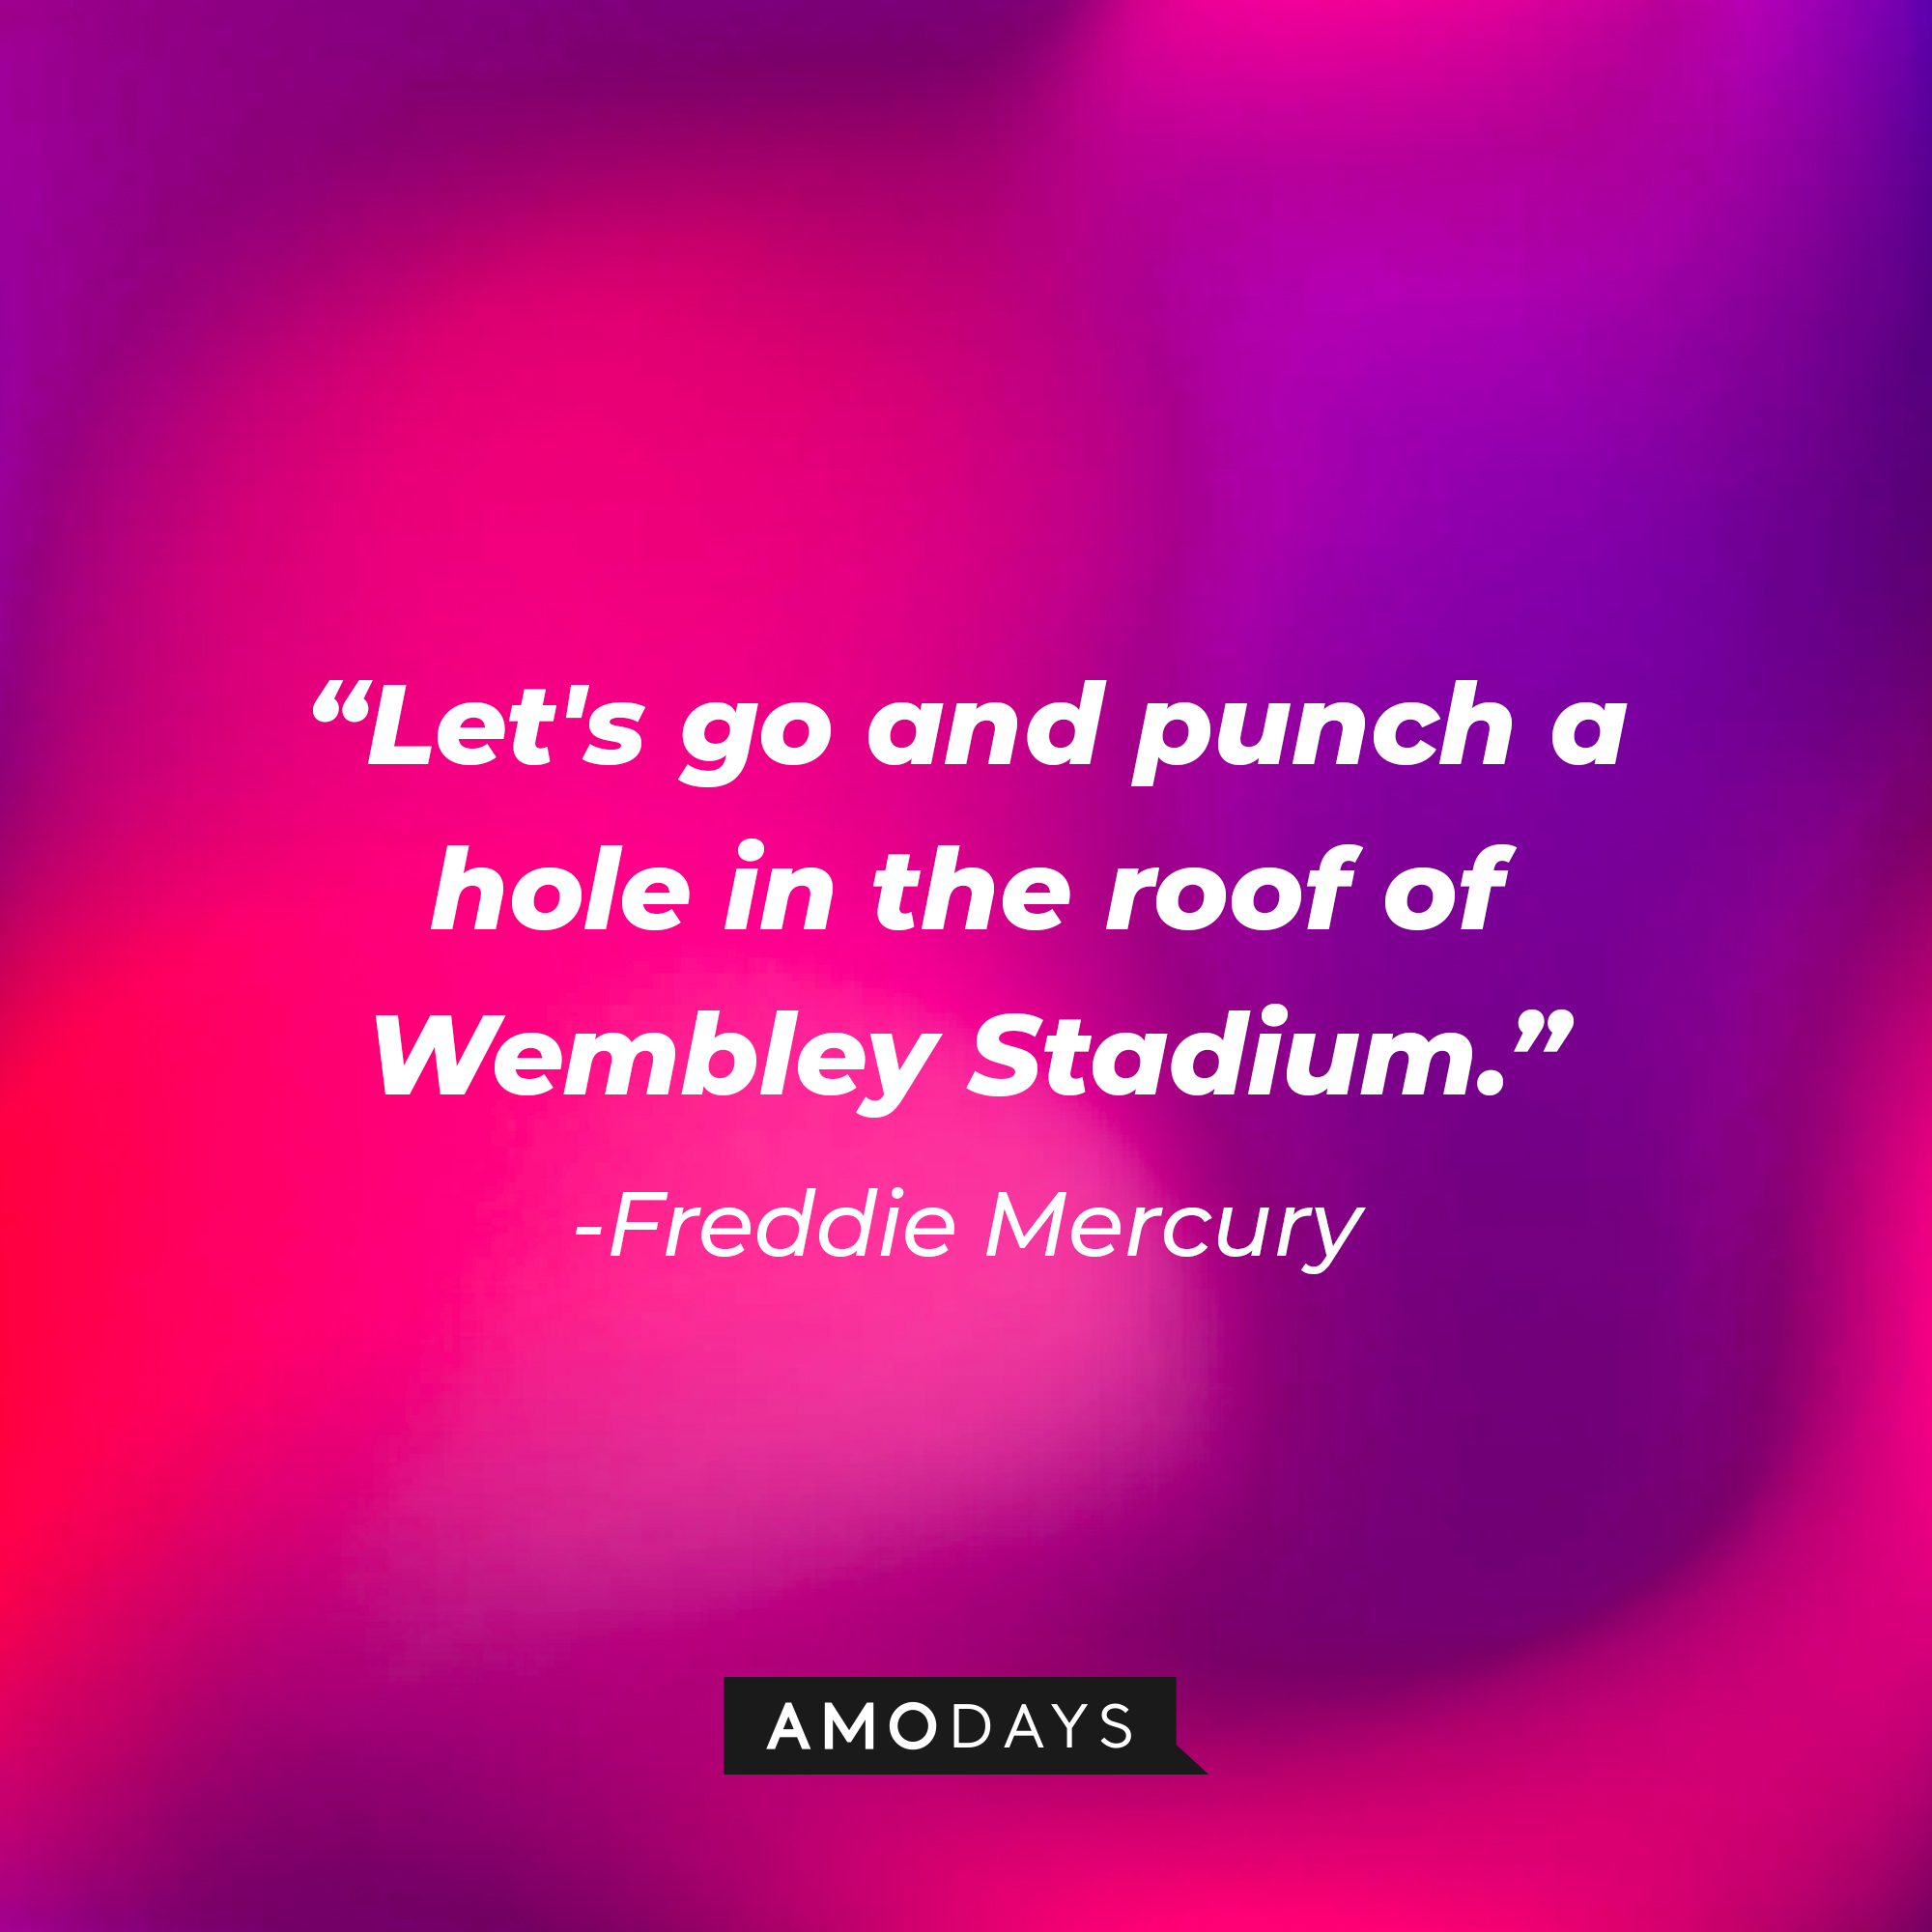 Freddie Mercury with his quote: "Let's go and punch a hole in the roof of Wembley Stadium." | Source: Amodays